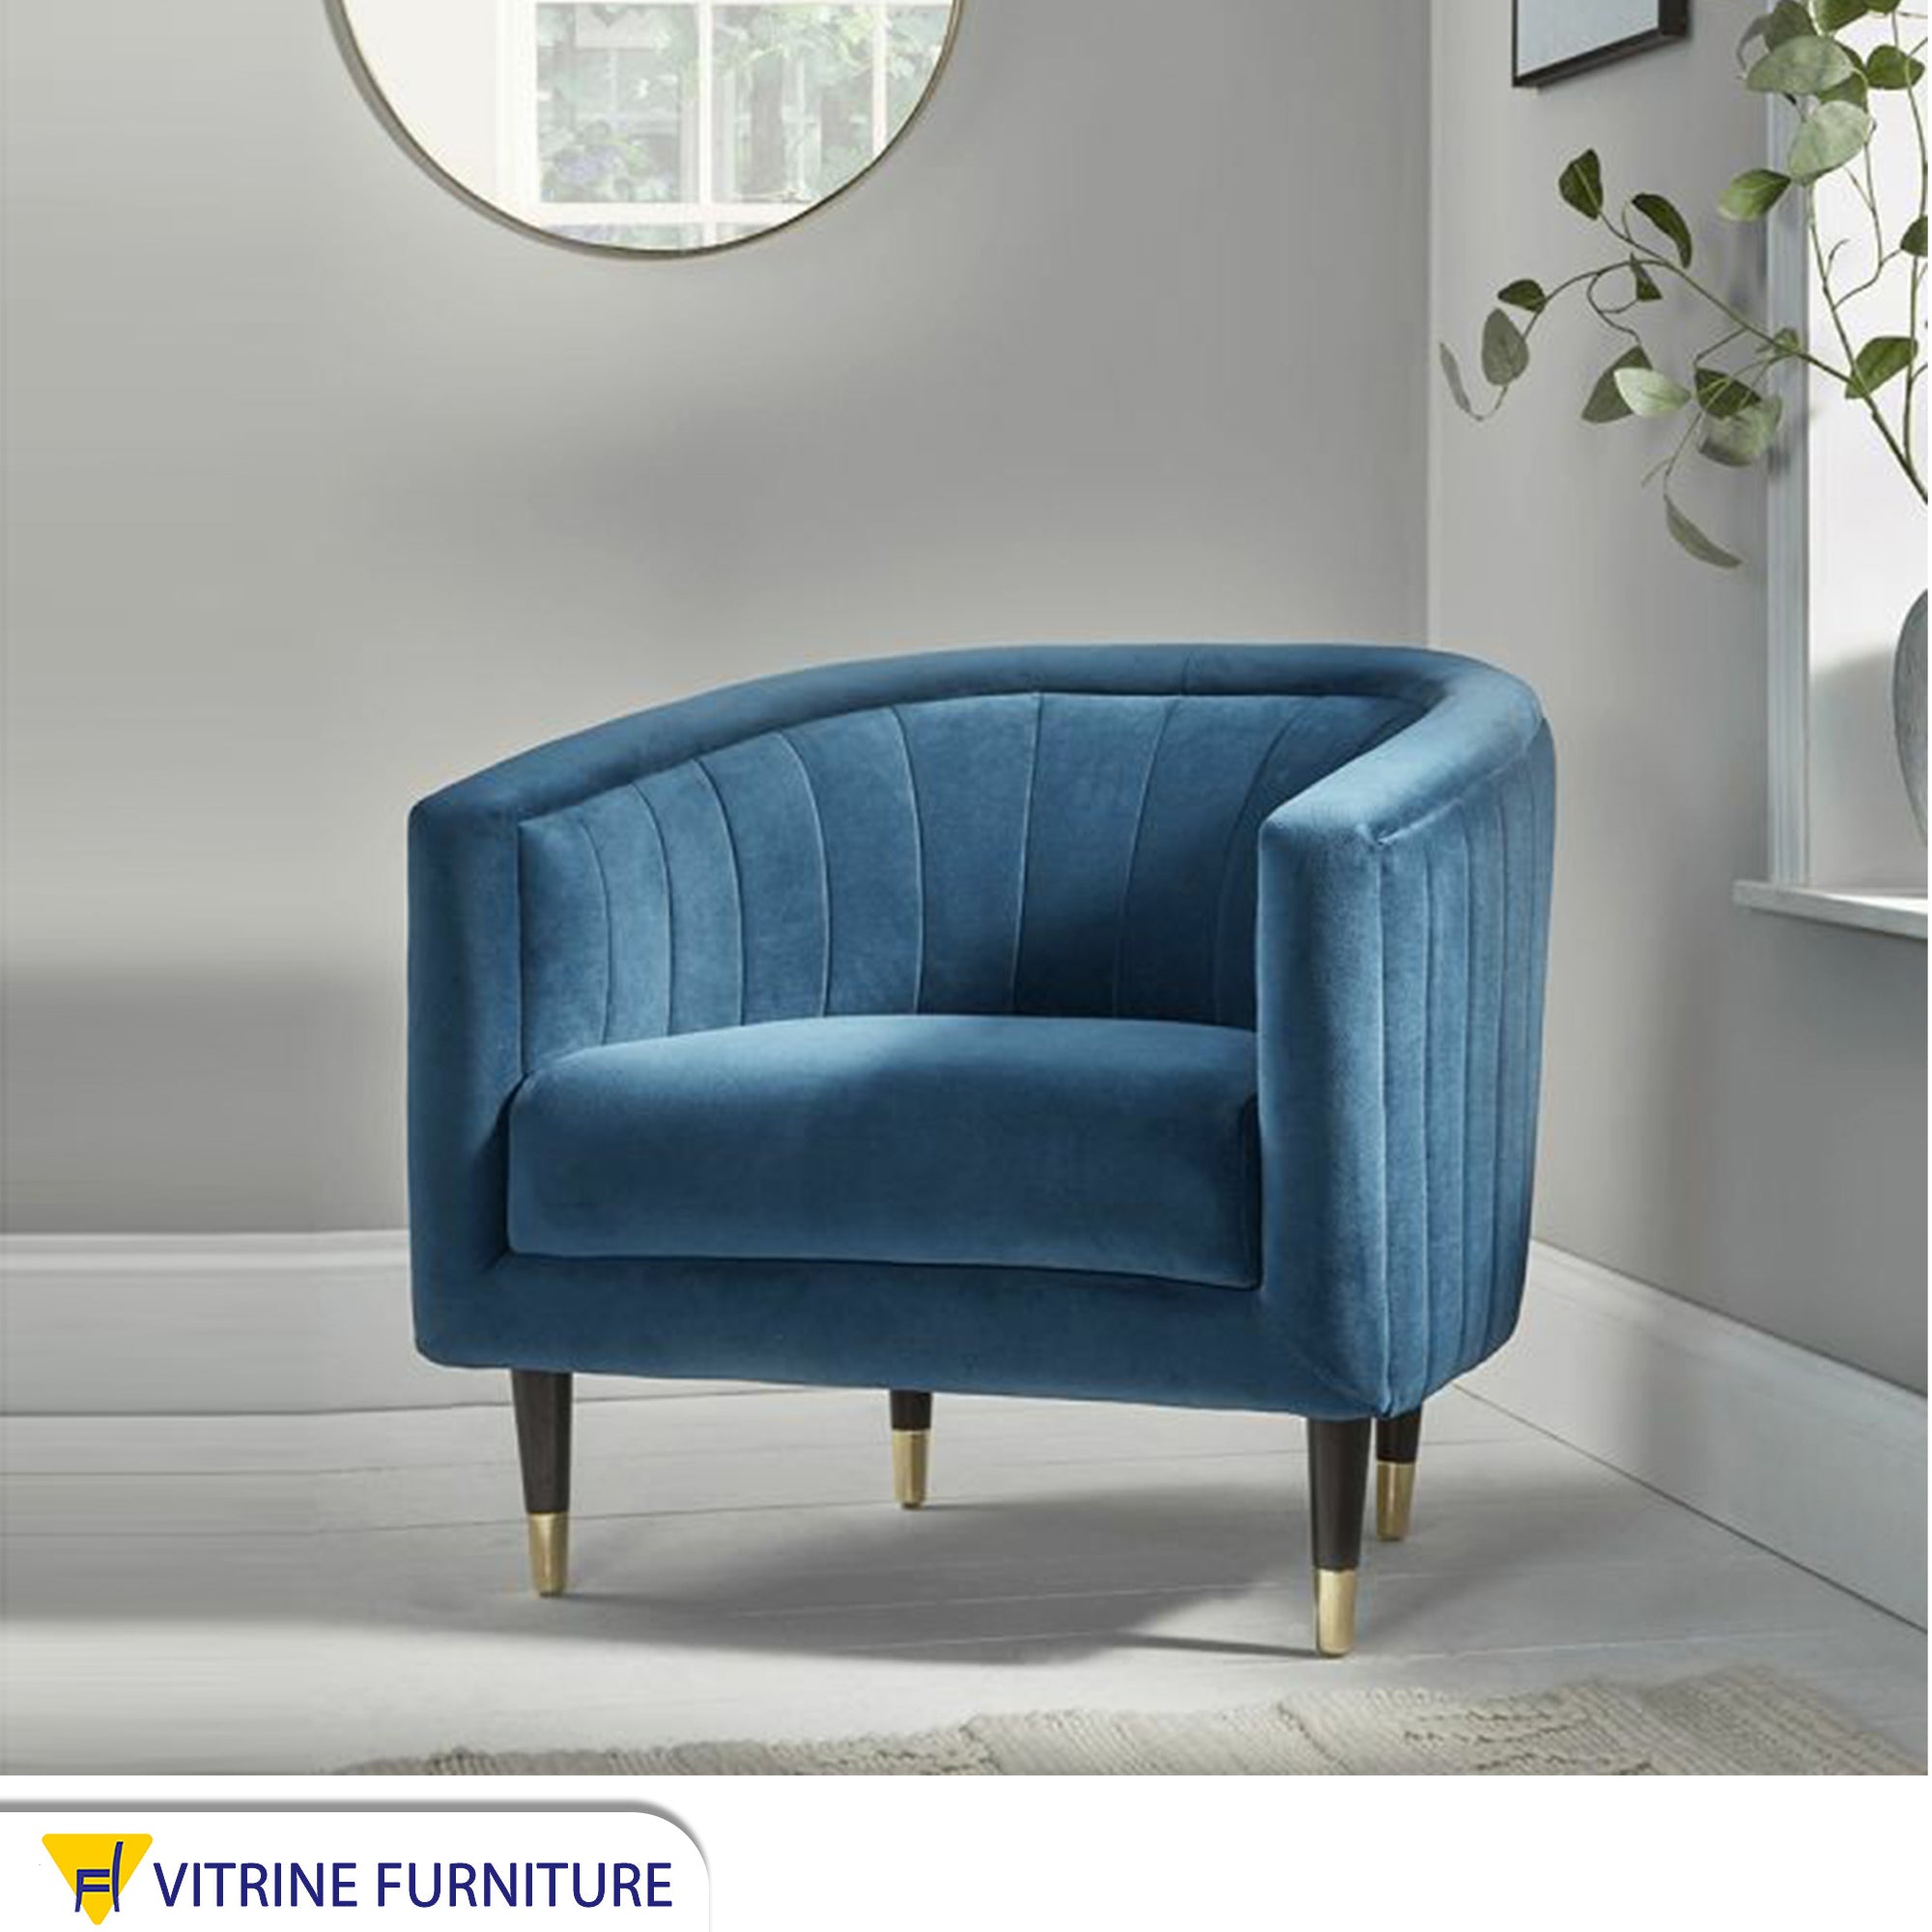 A blue floral chair with longitudinal stitching from the inside and outside